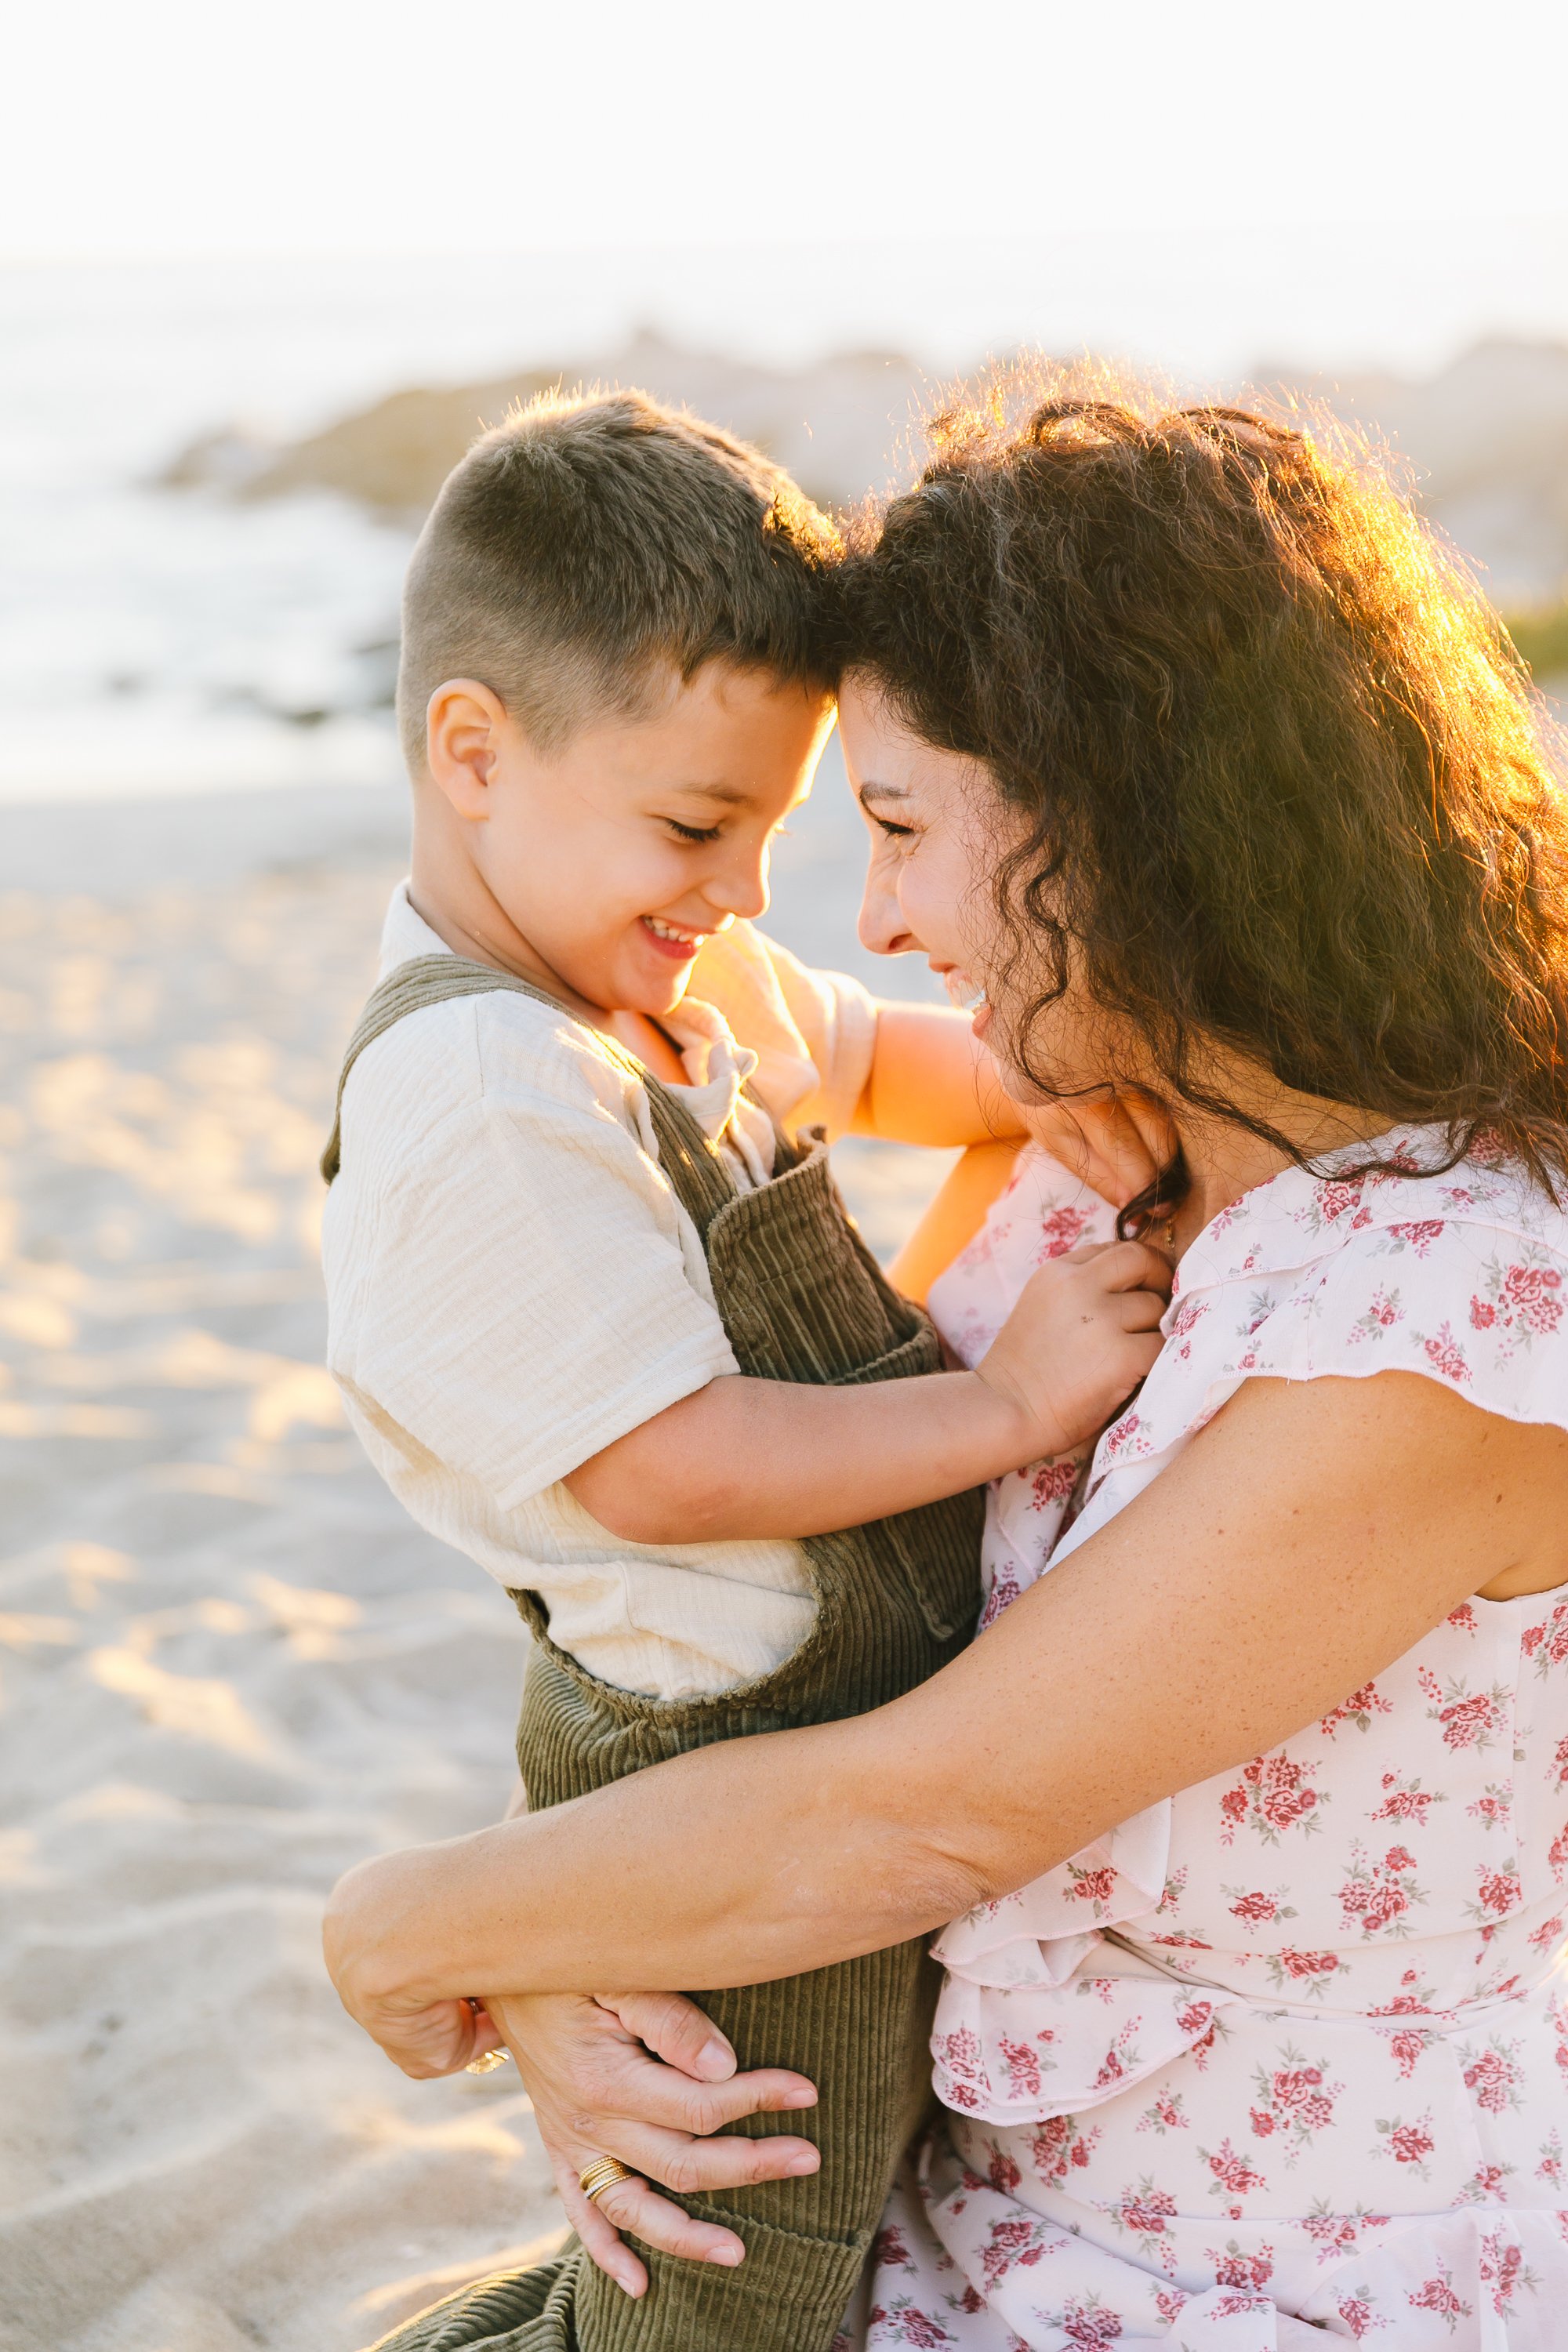 Los_Angeles_Family_Photographer_Mini_session_Golden_hour_Beach_Kid_Maternity_baby_Children_Holiday_Photography-2318.jpg